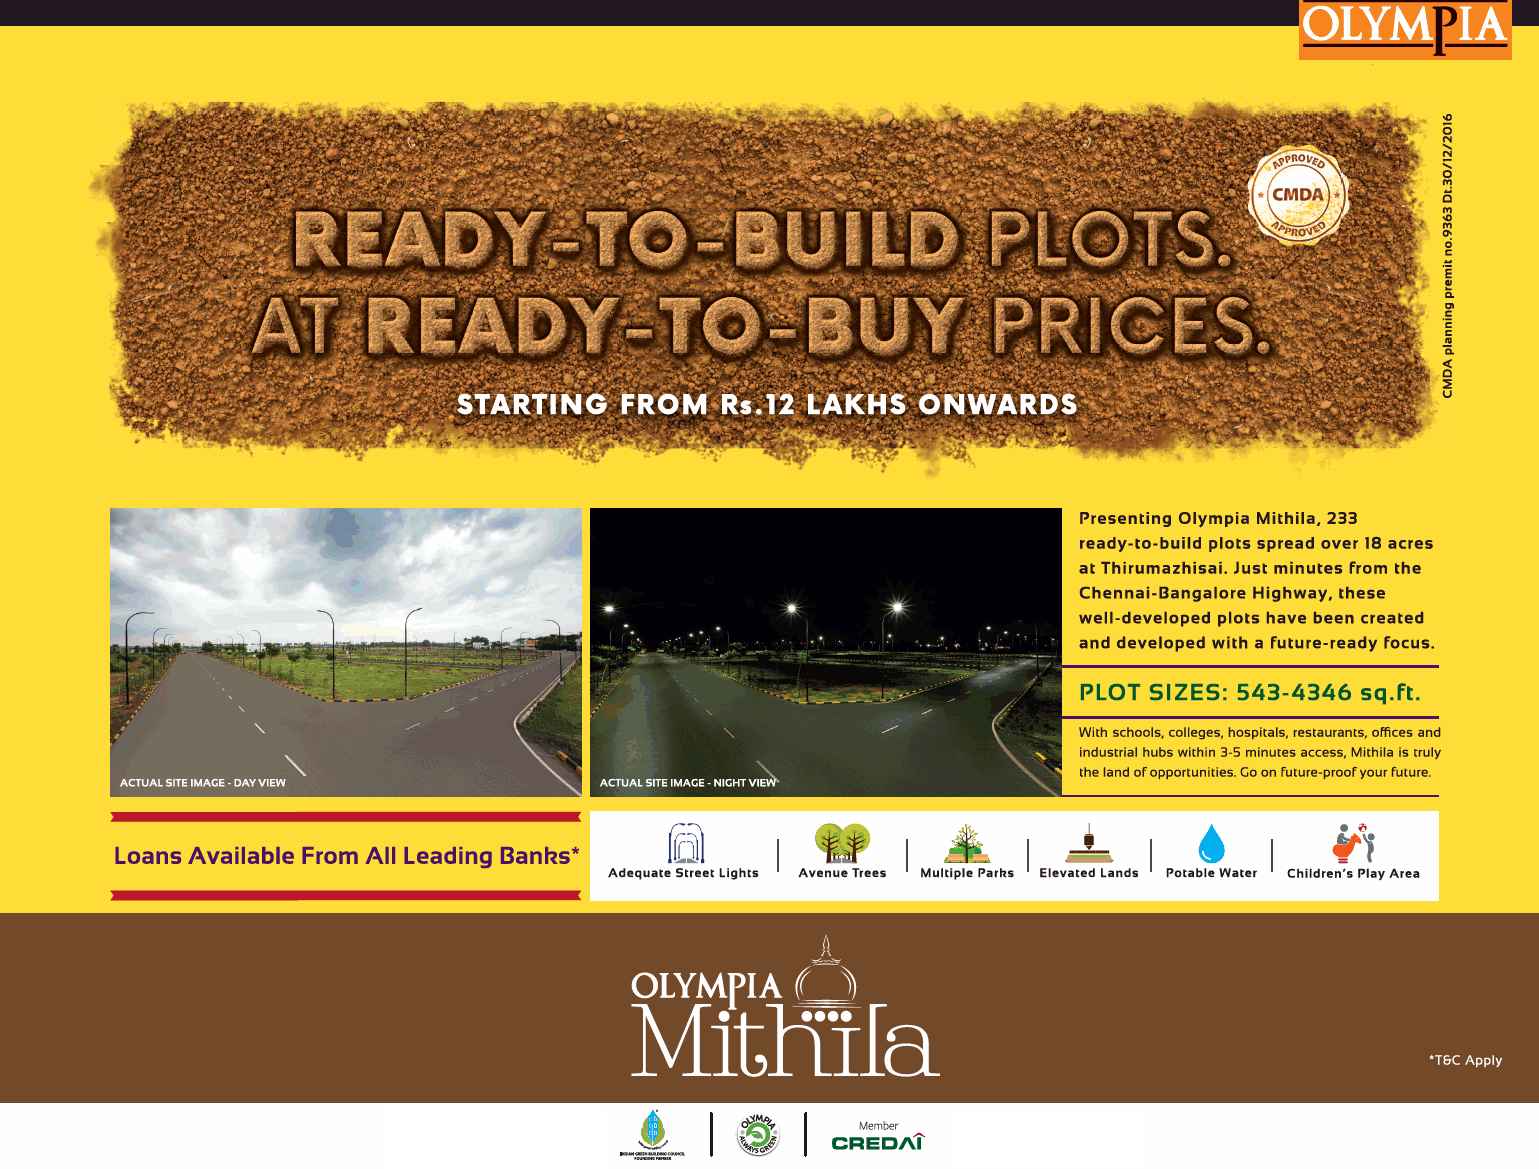 Book ready to build plots @ Rs. 12 Lakhs onwards at Olympia Mithila in Chennai